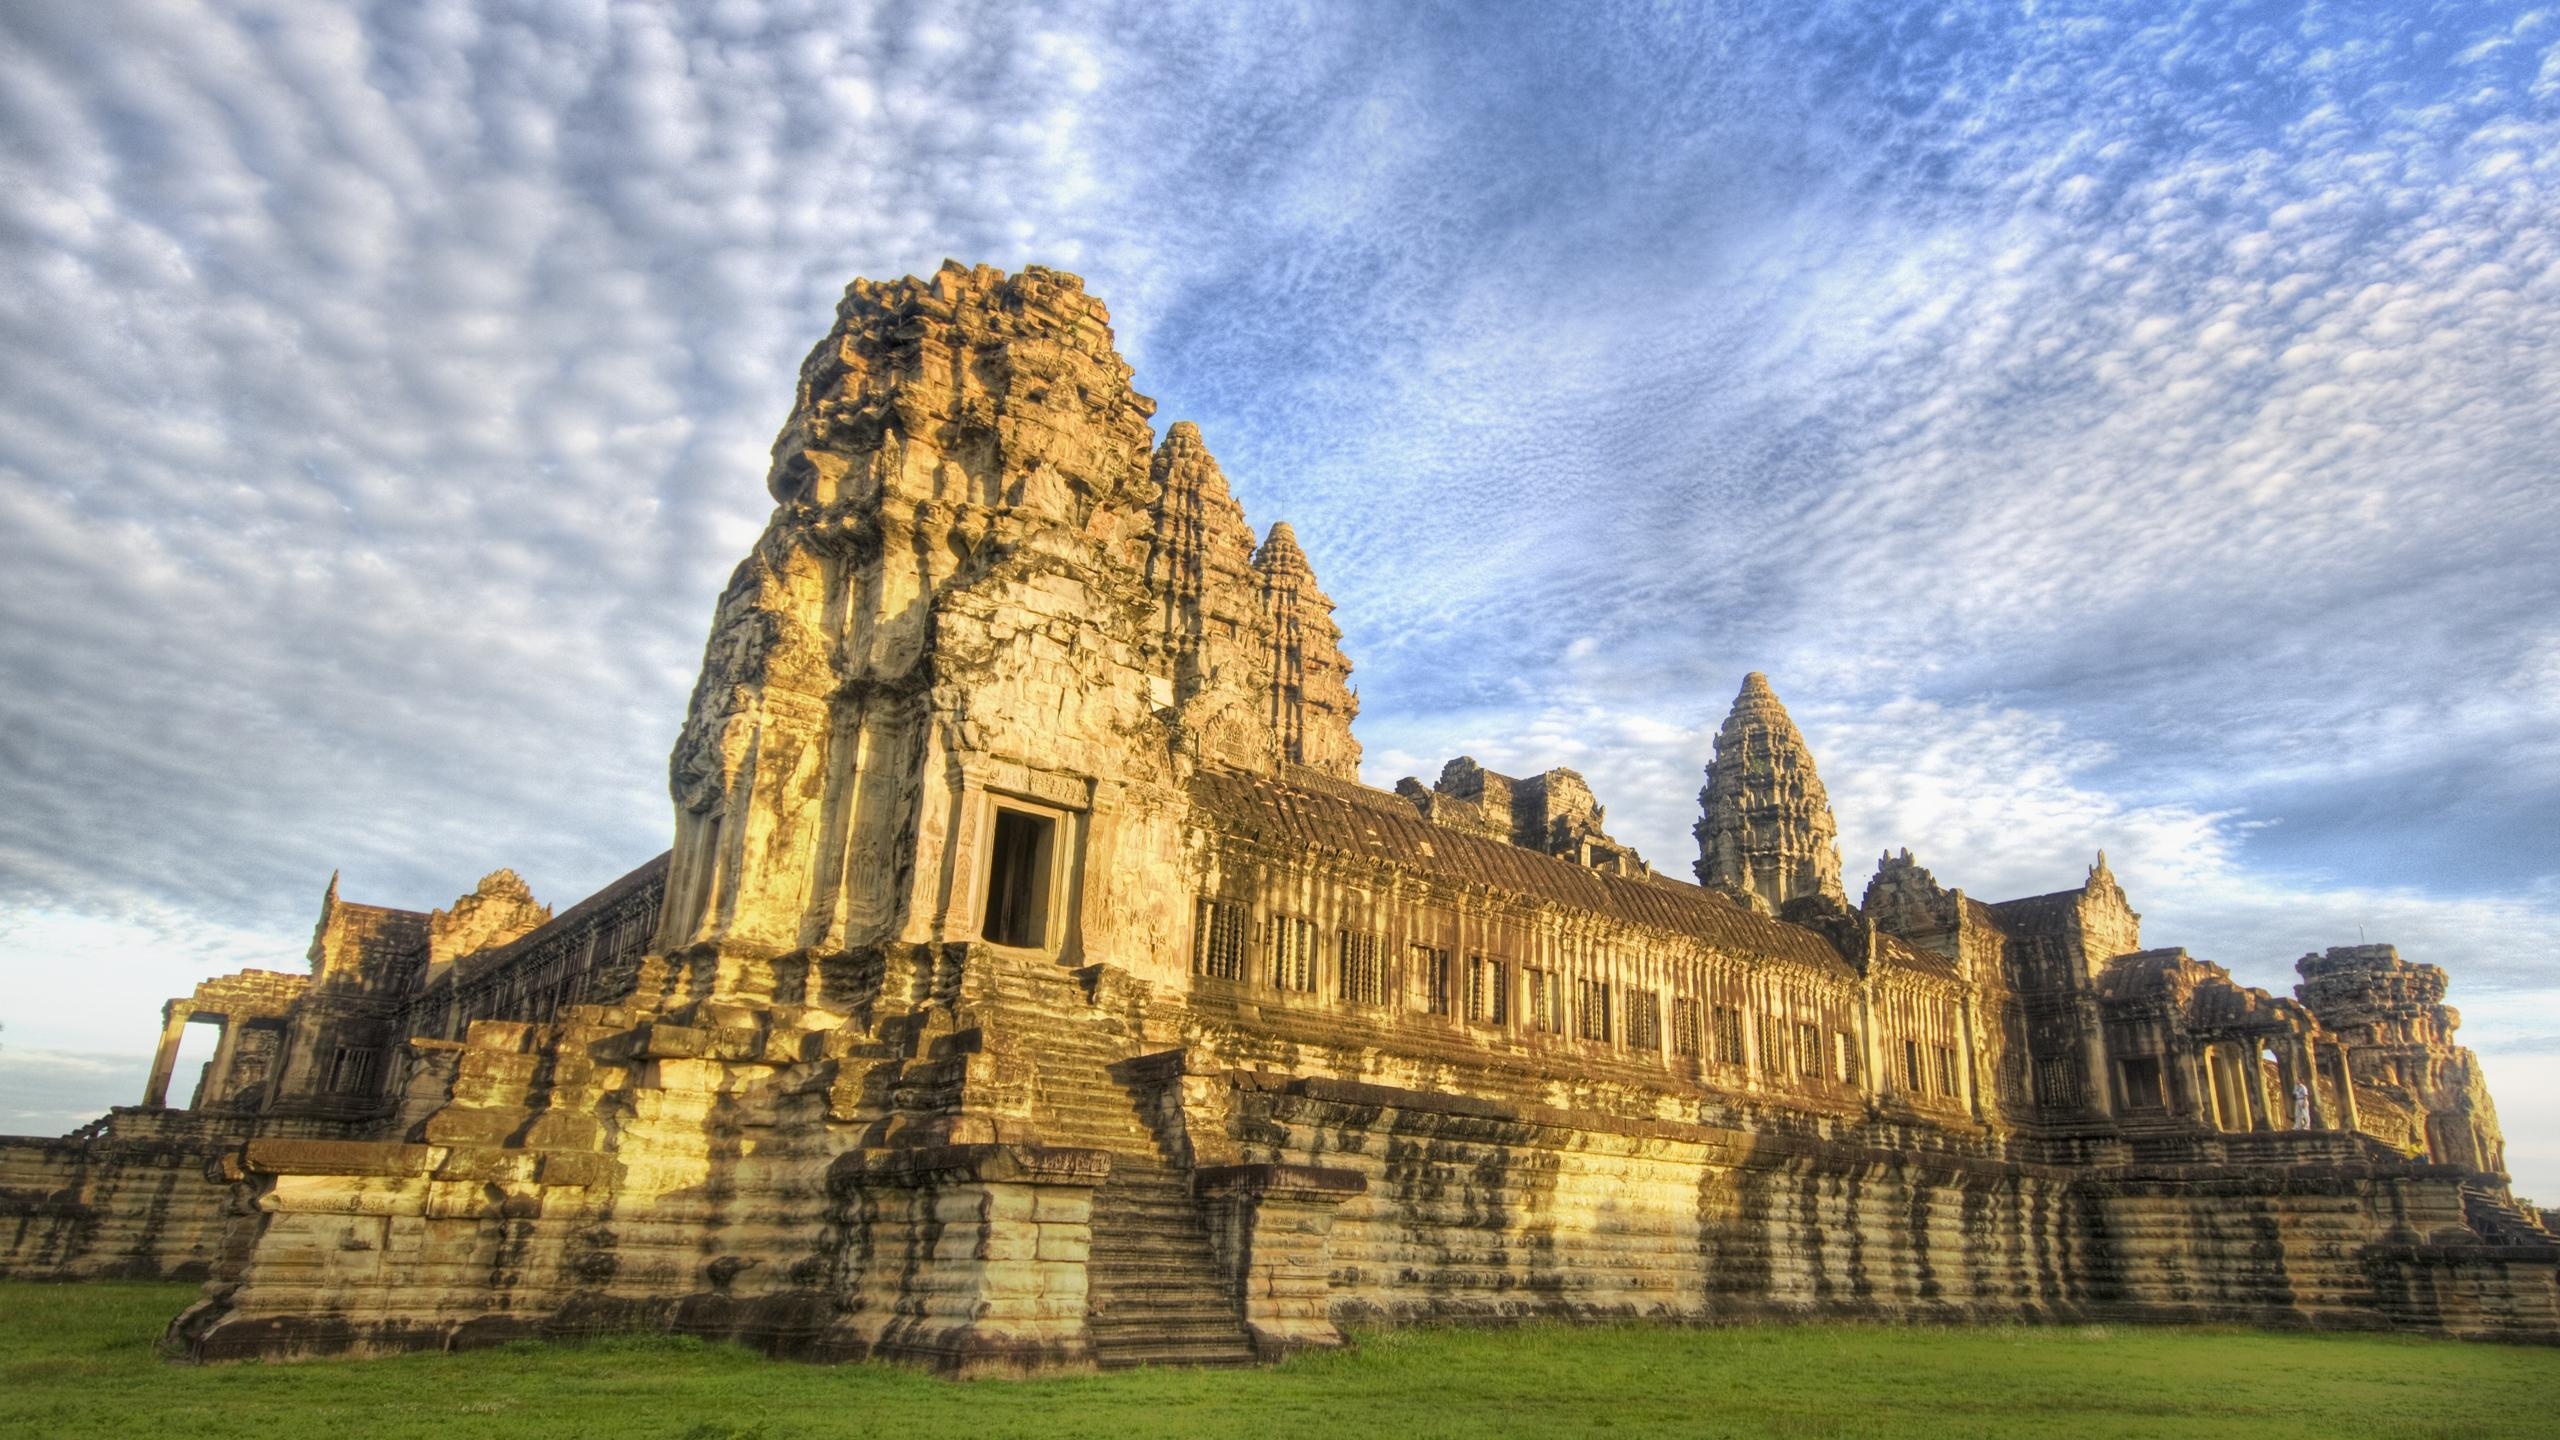 Siem Reap, Cambodia, Historical sites, Temples galore, Travel photography, 2560x1440 HD Desktop